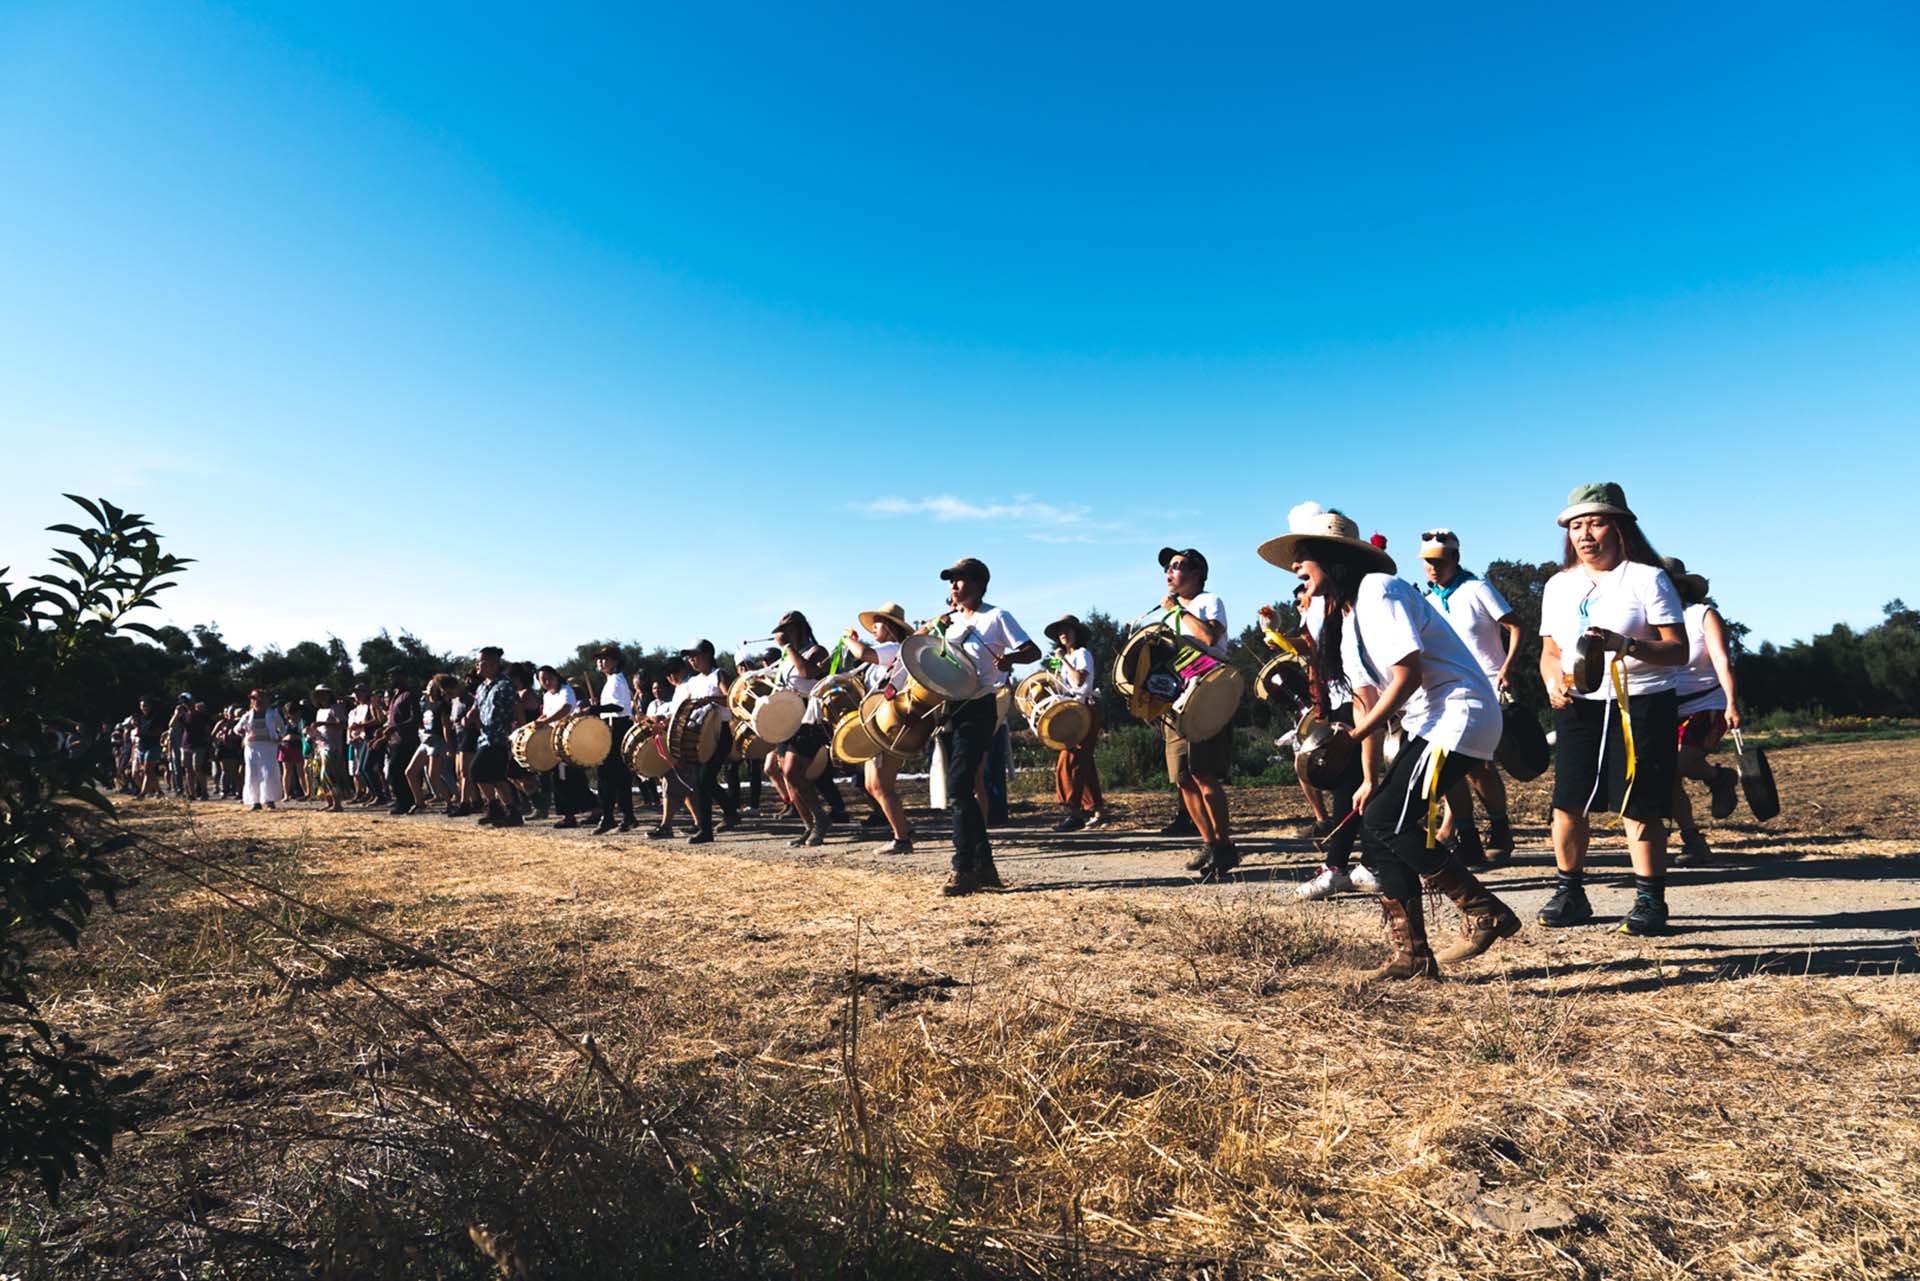 A line of traditional Korean drummers perform a ceremony in an open field.